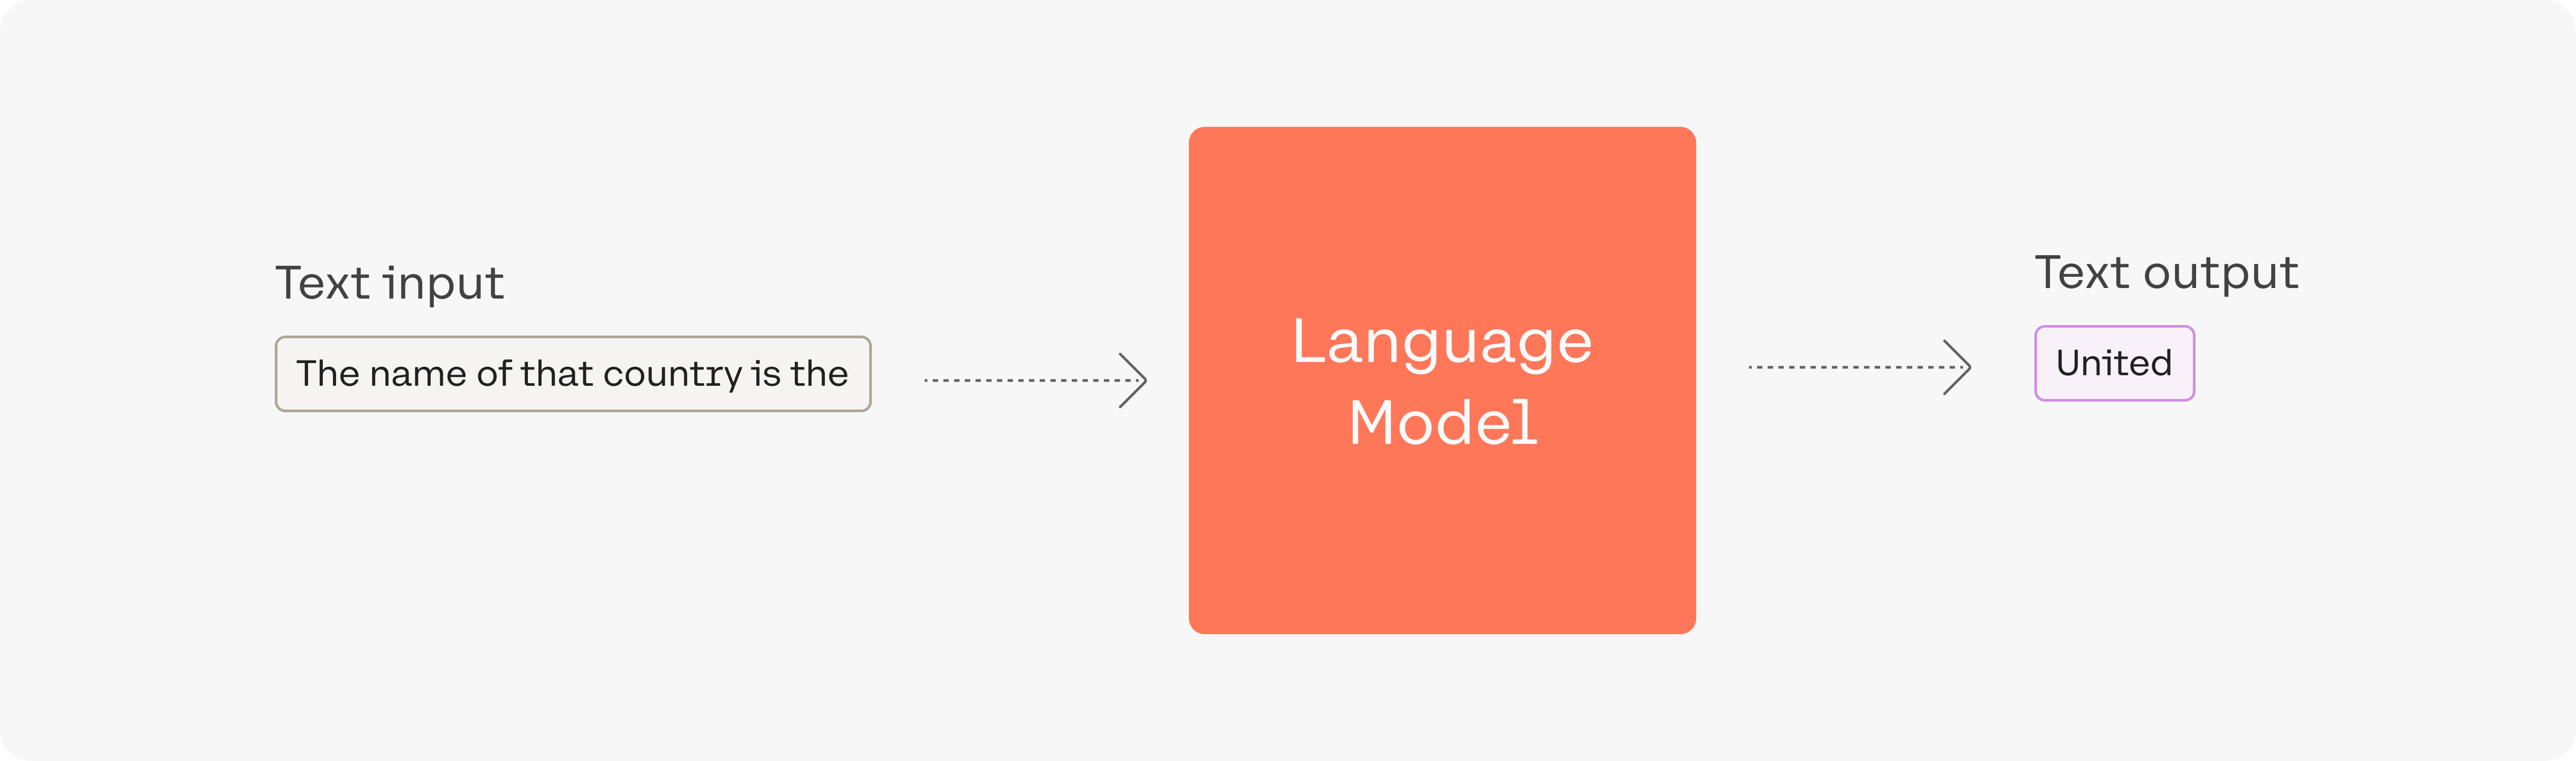 Example output of a generation language model.